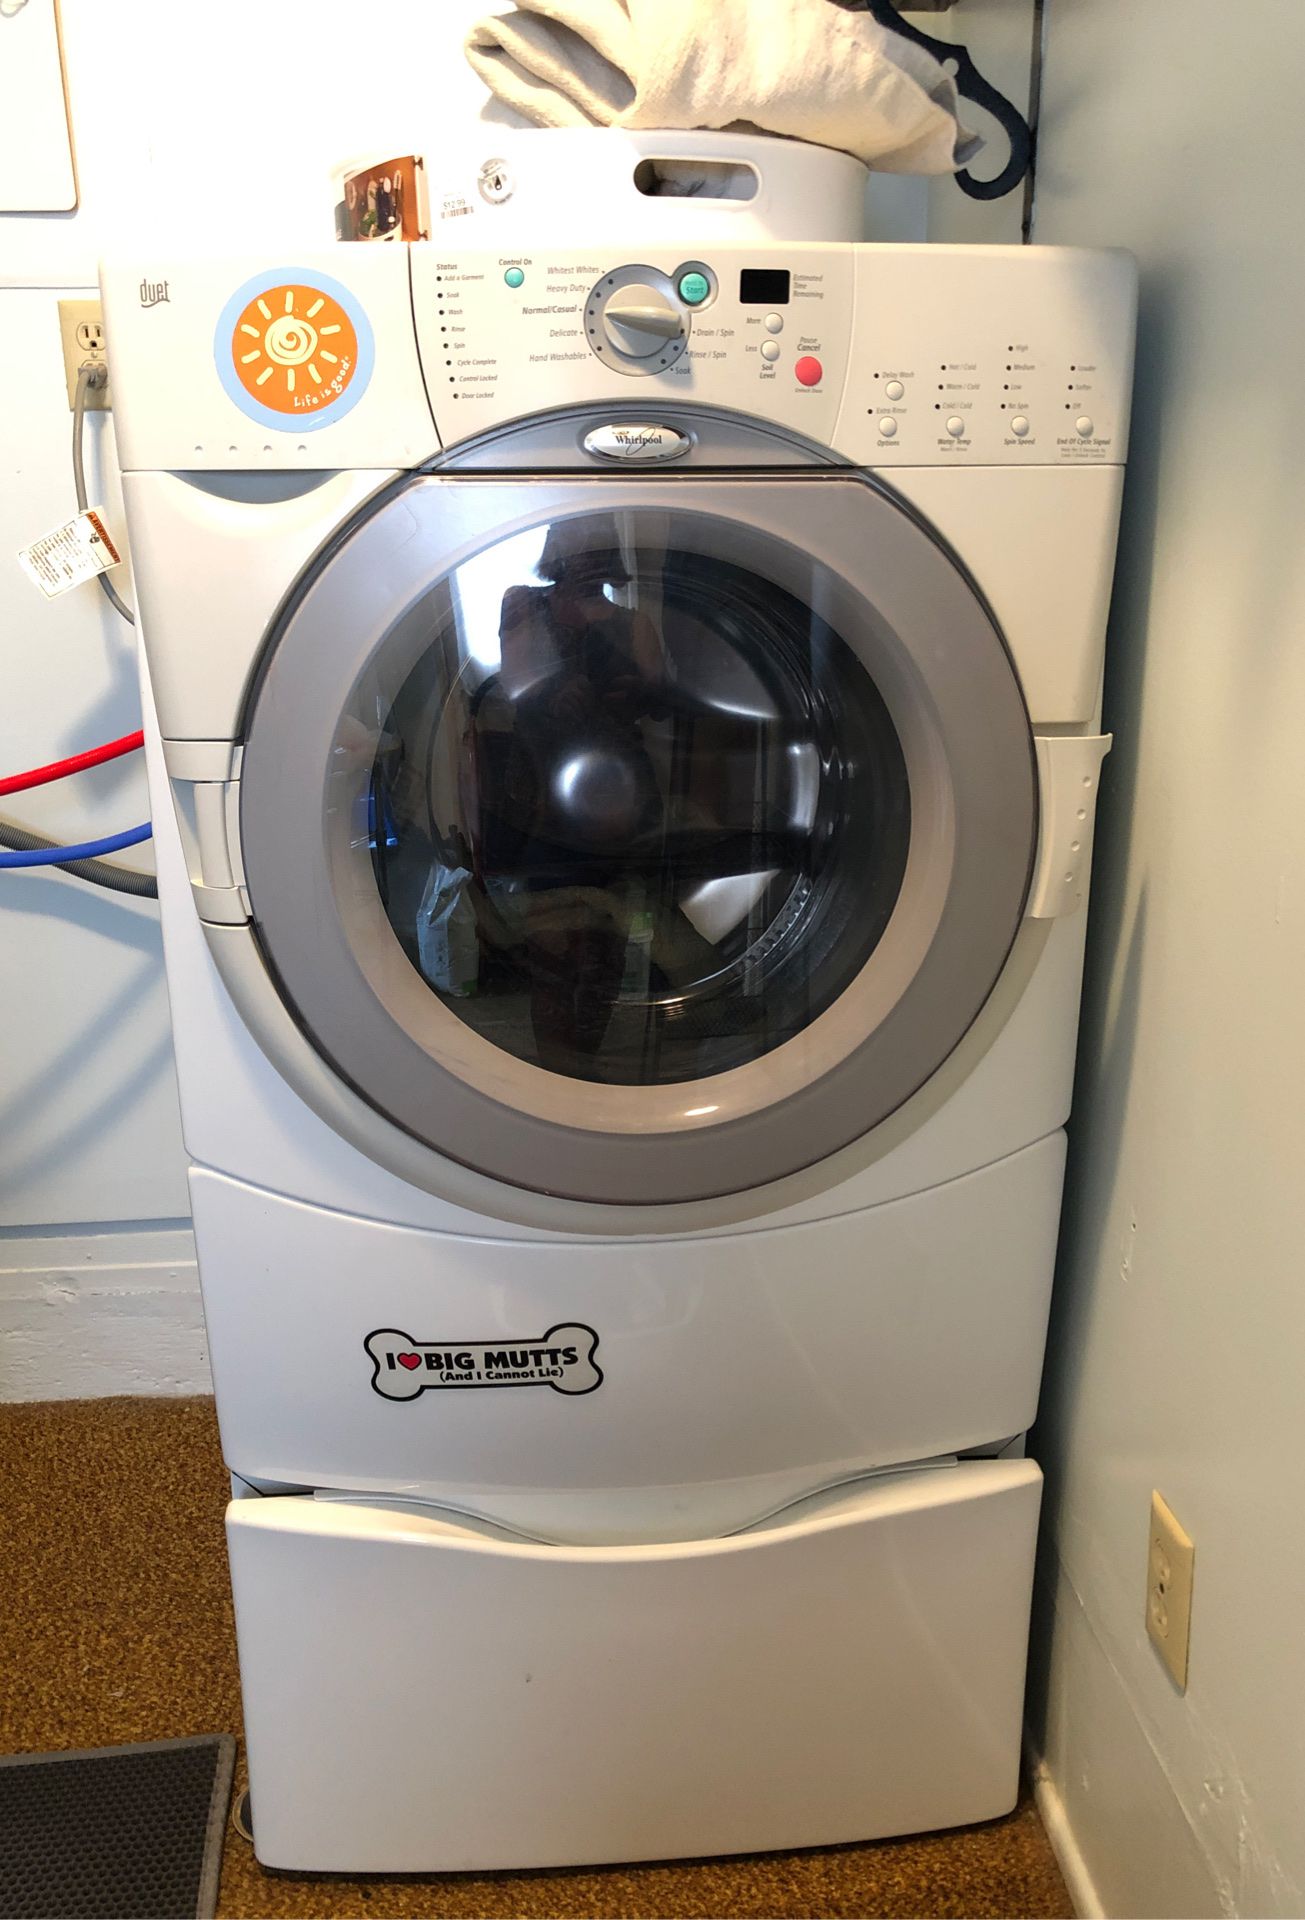 2006 whirlpool front load washer. Excellent condition.. superior washing. No mold no smells. Well kept machine.